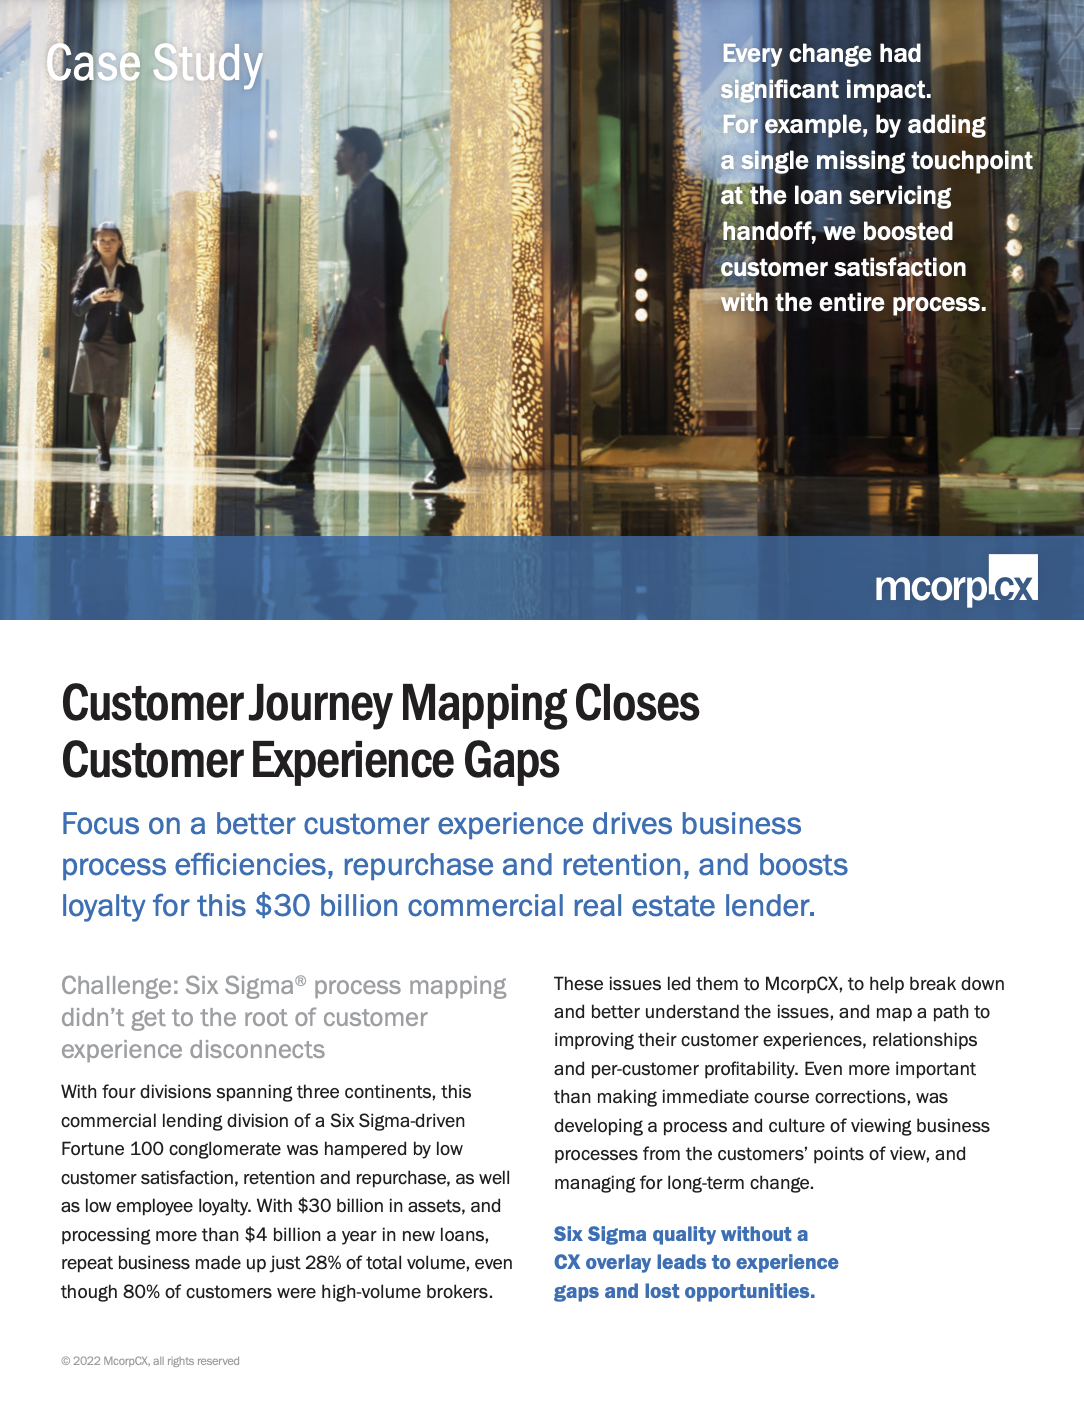 Customer Journey Mapping Closes Customer Experience Gaps